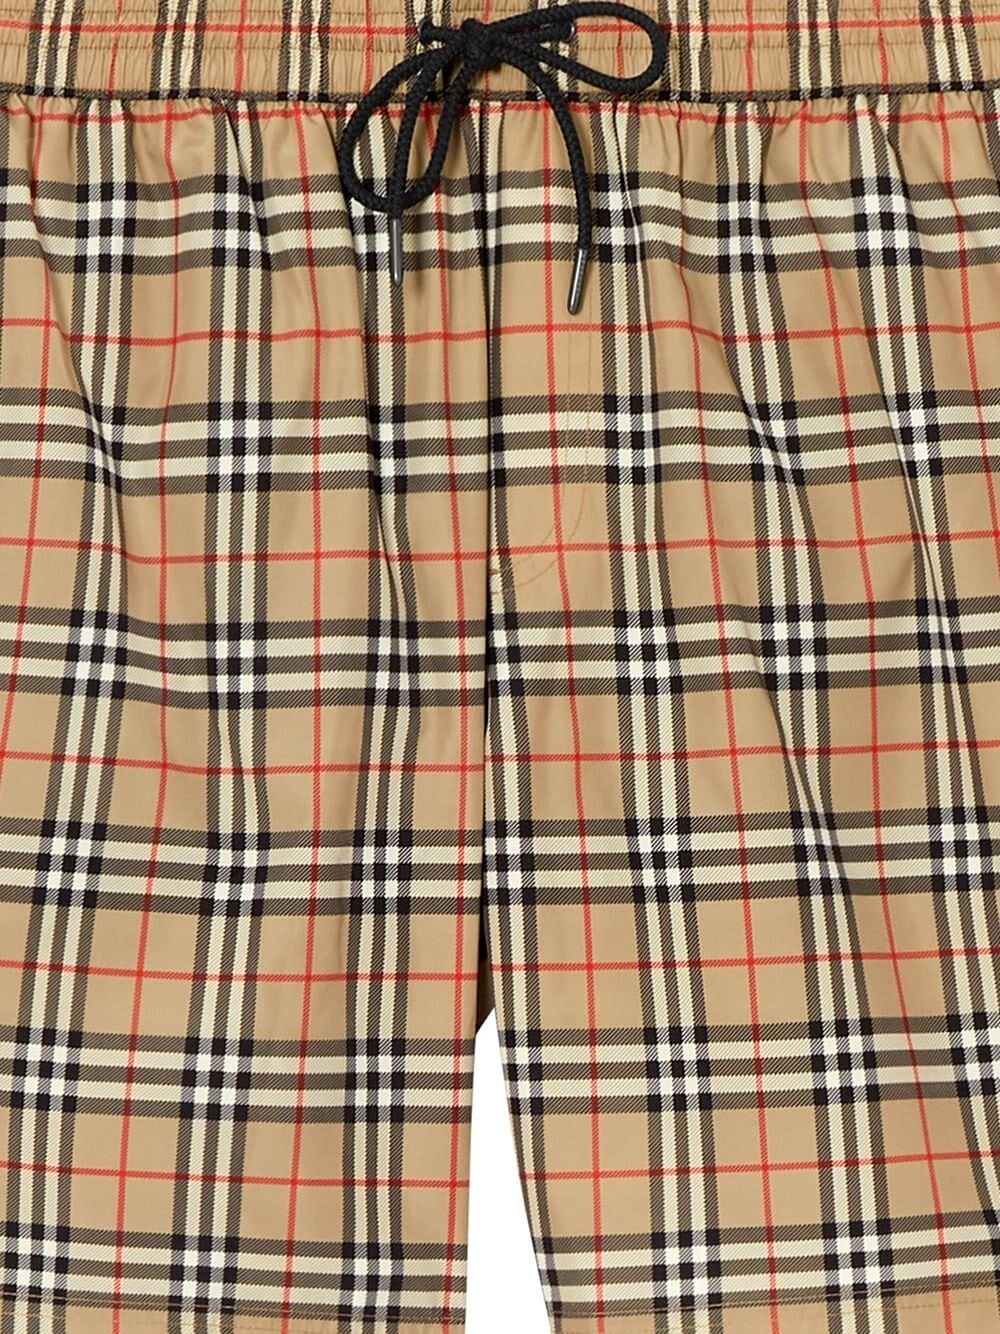 Burberry Vintage Small Check Print Swim Shorts in Beige